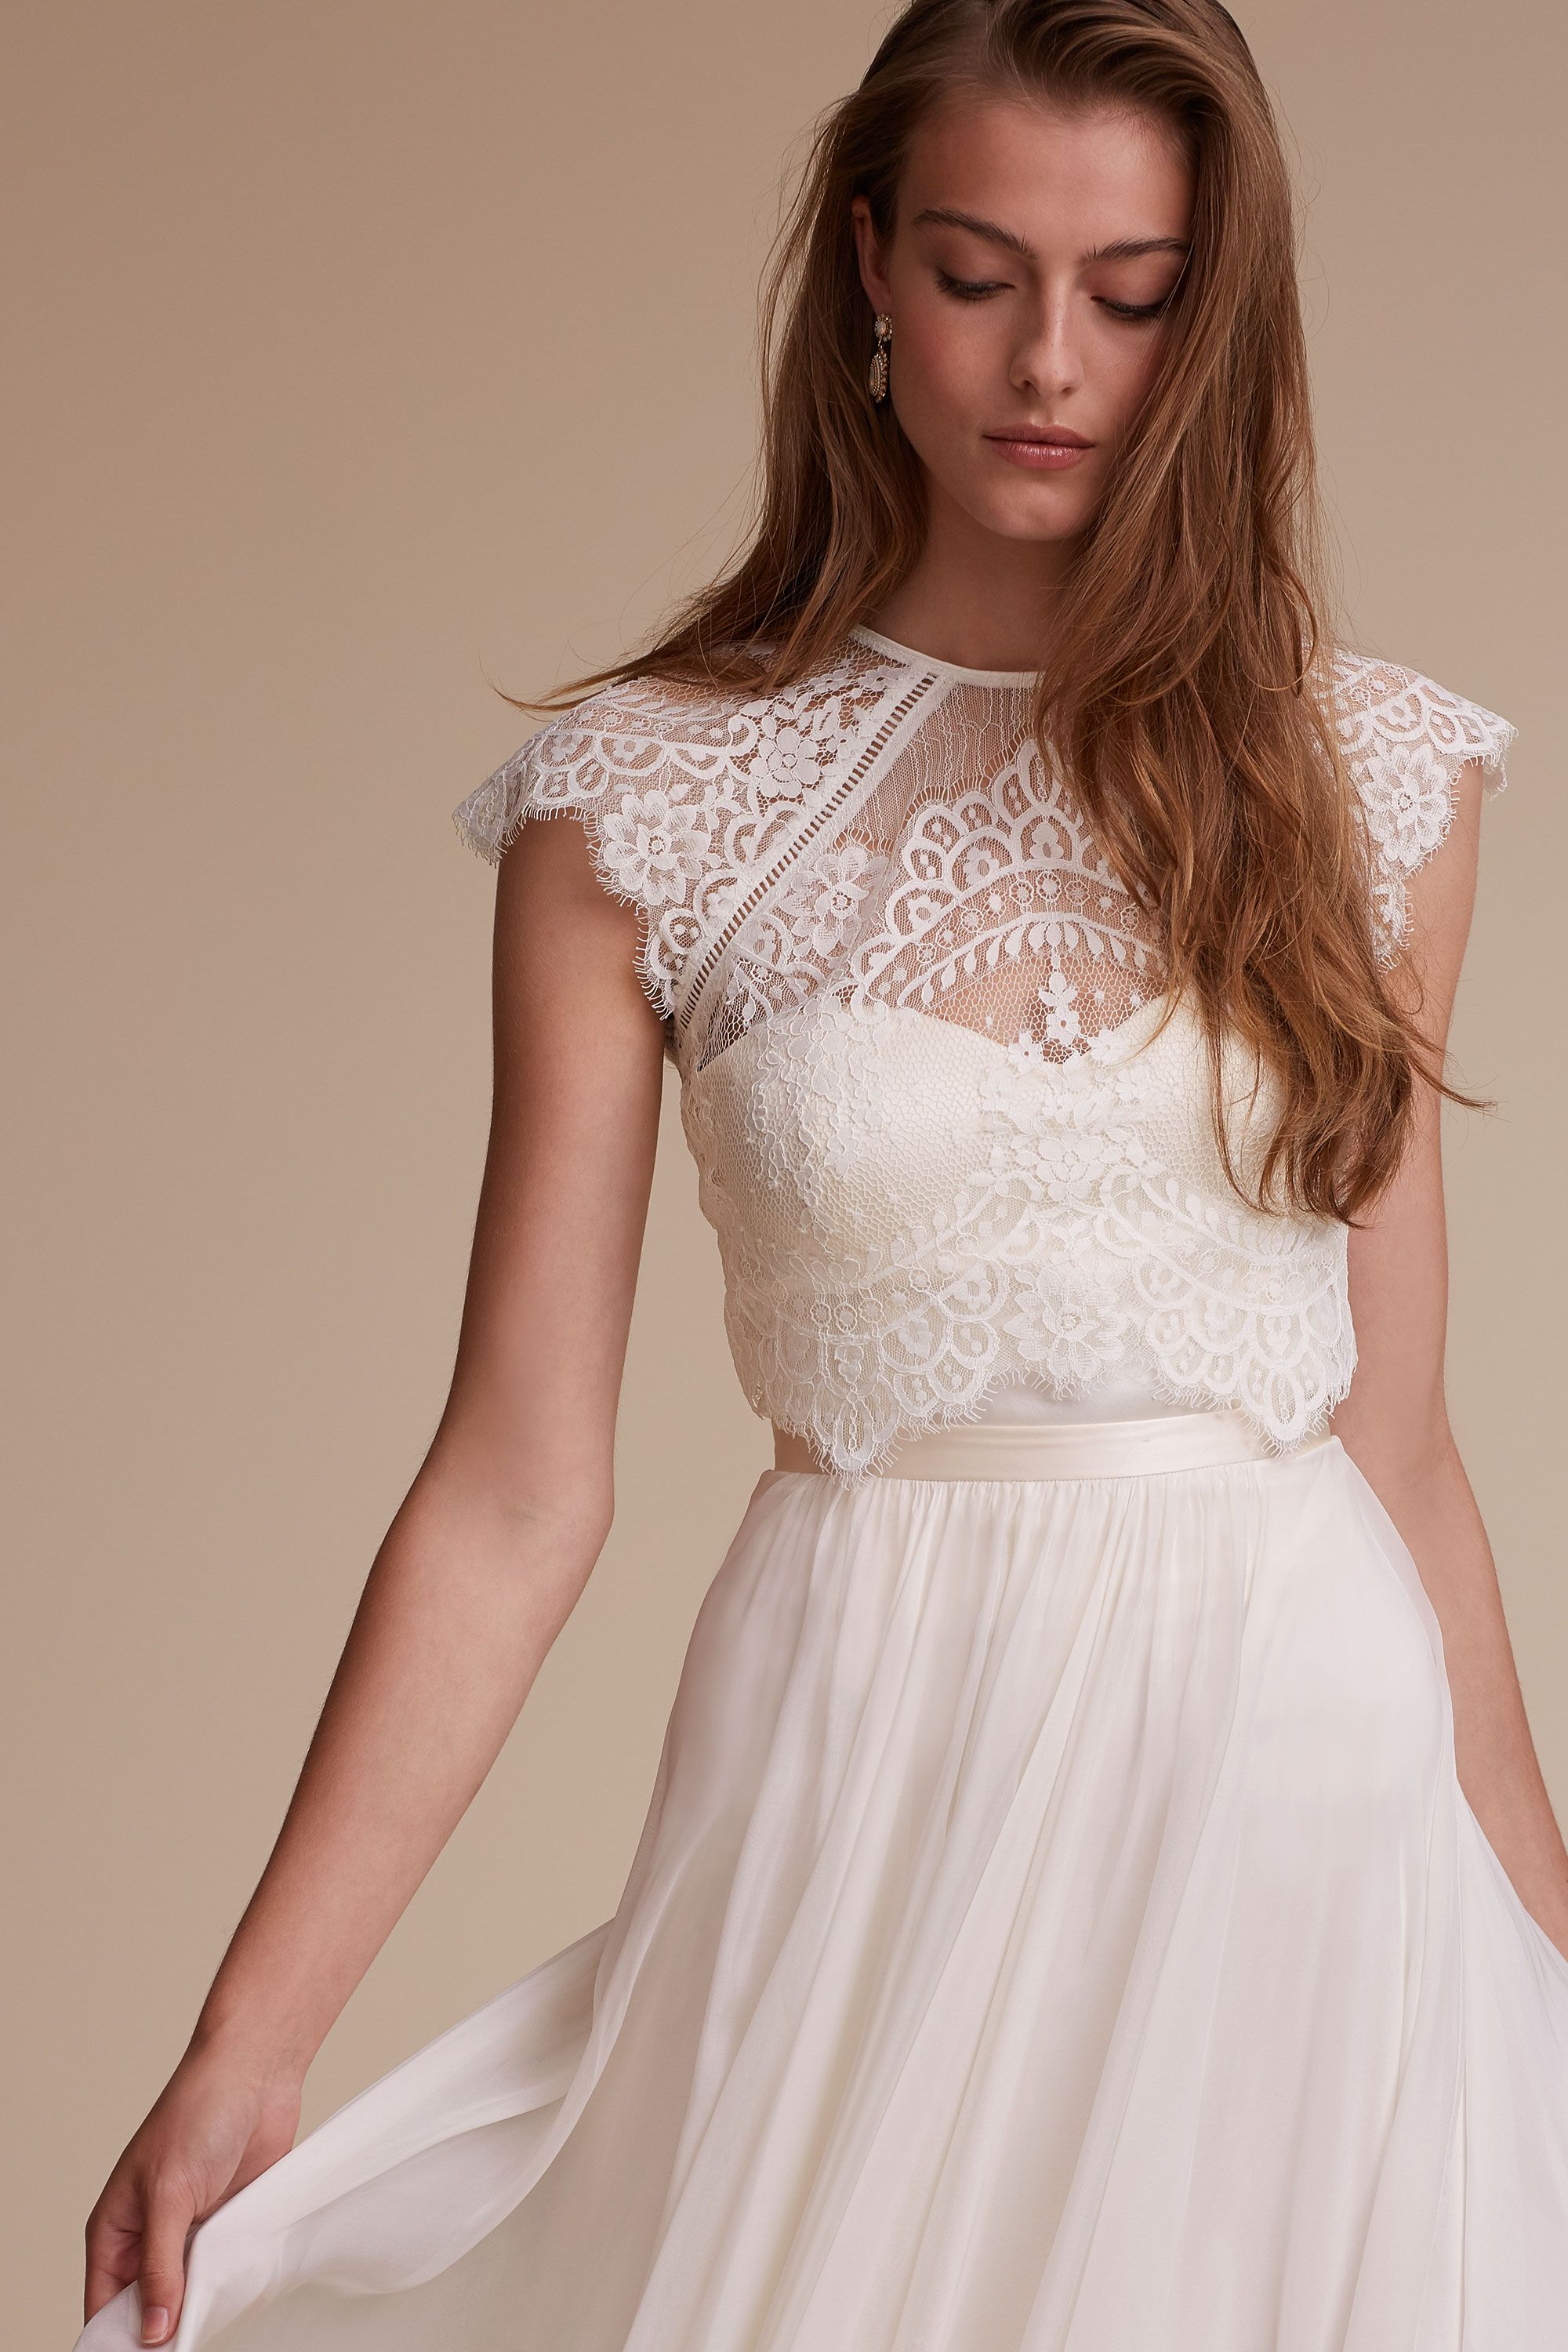 Image of white dresses that cover shoulders